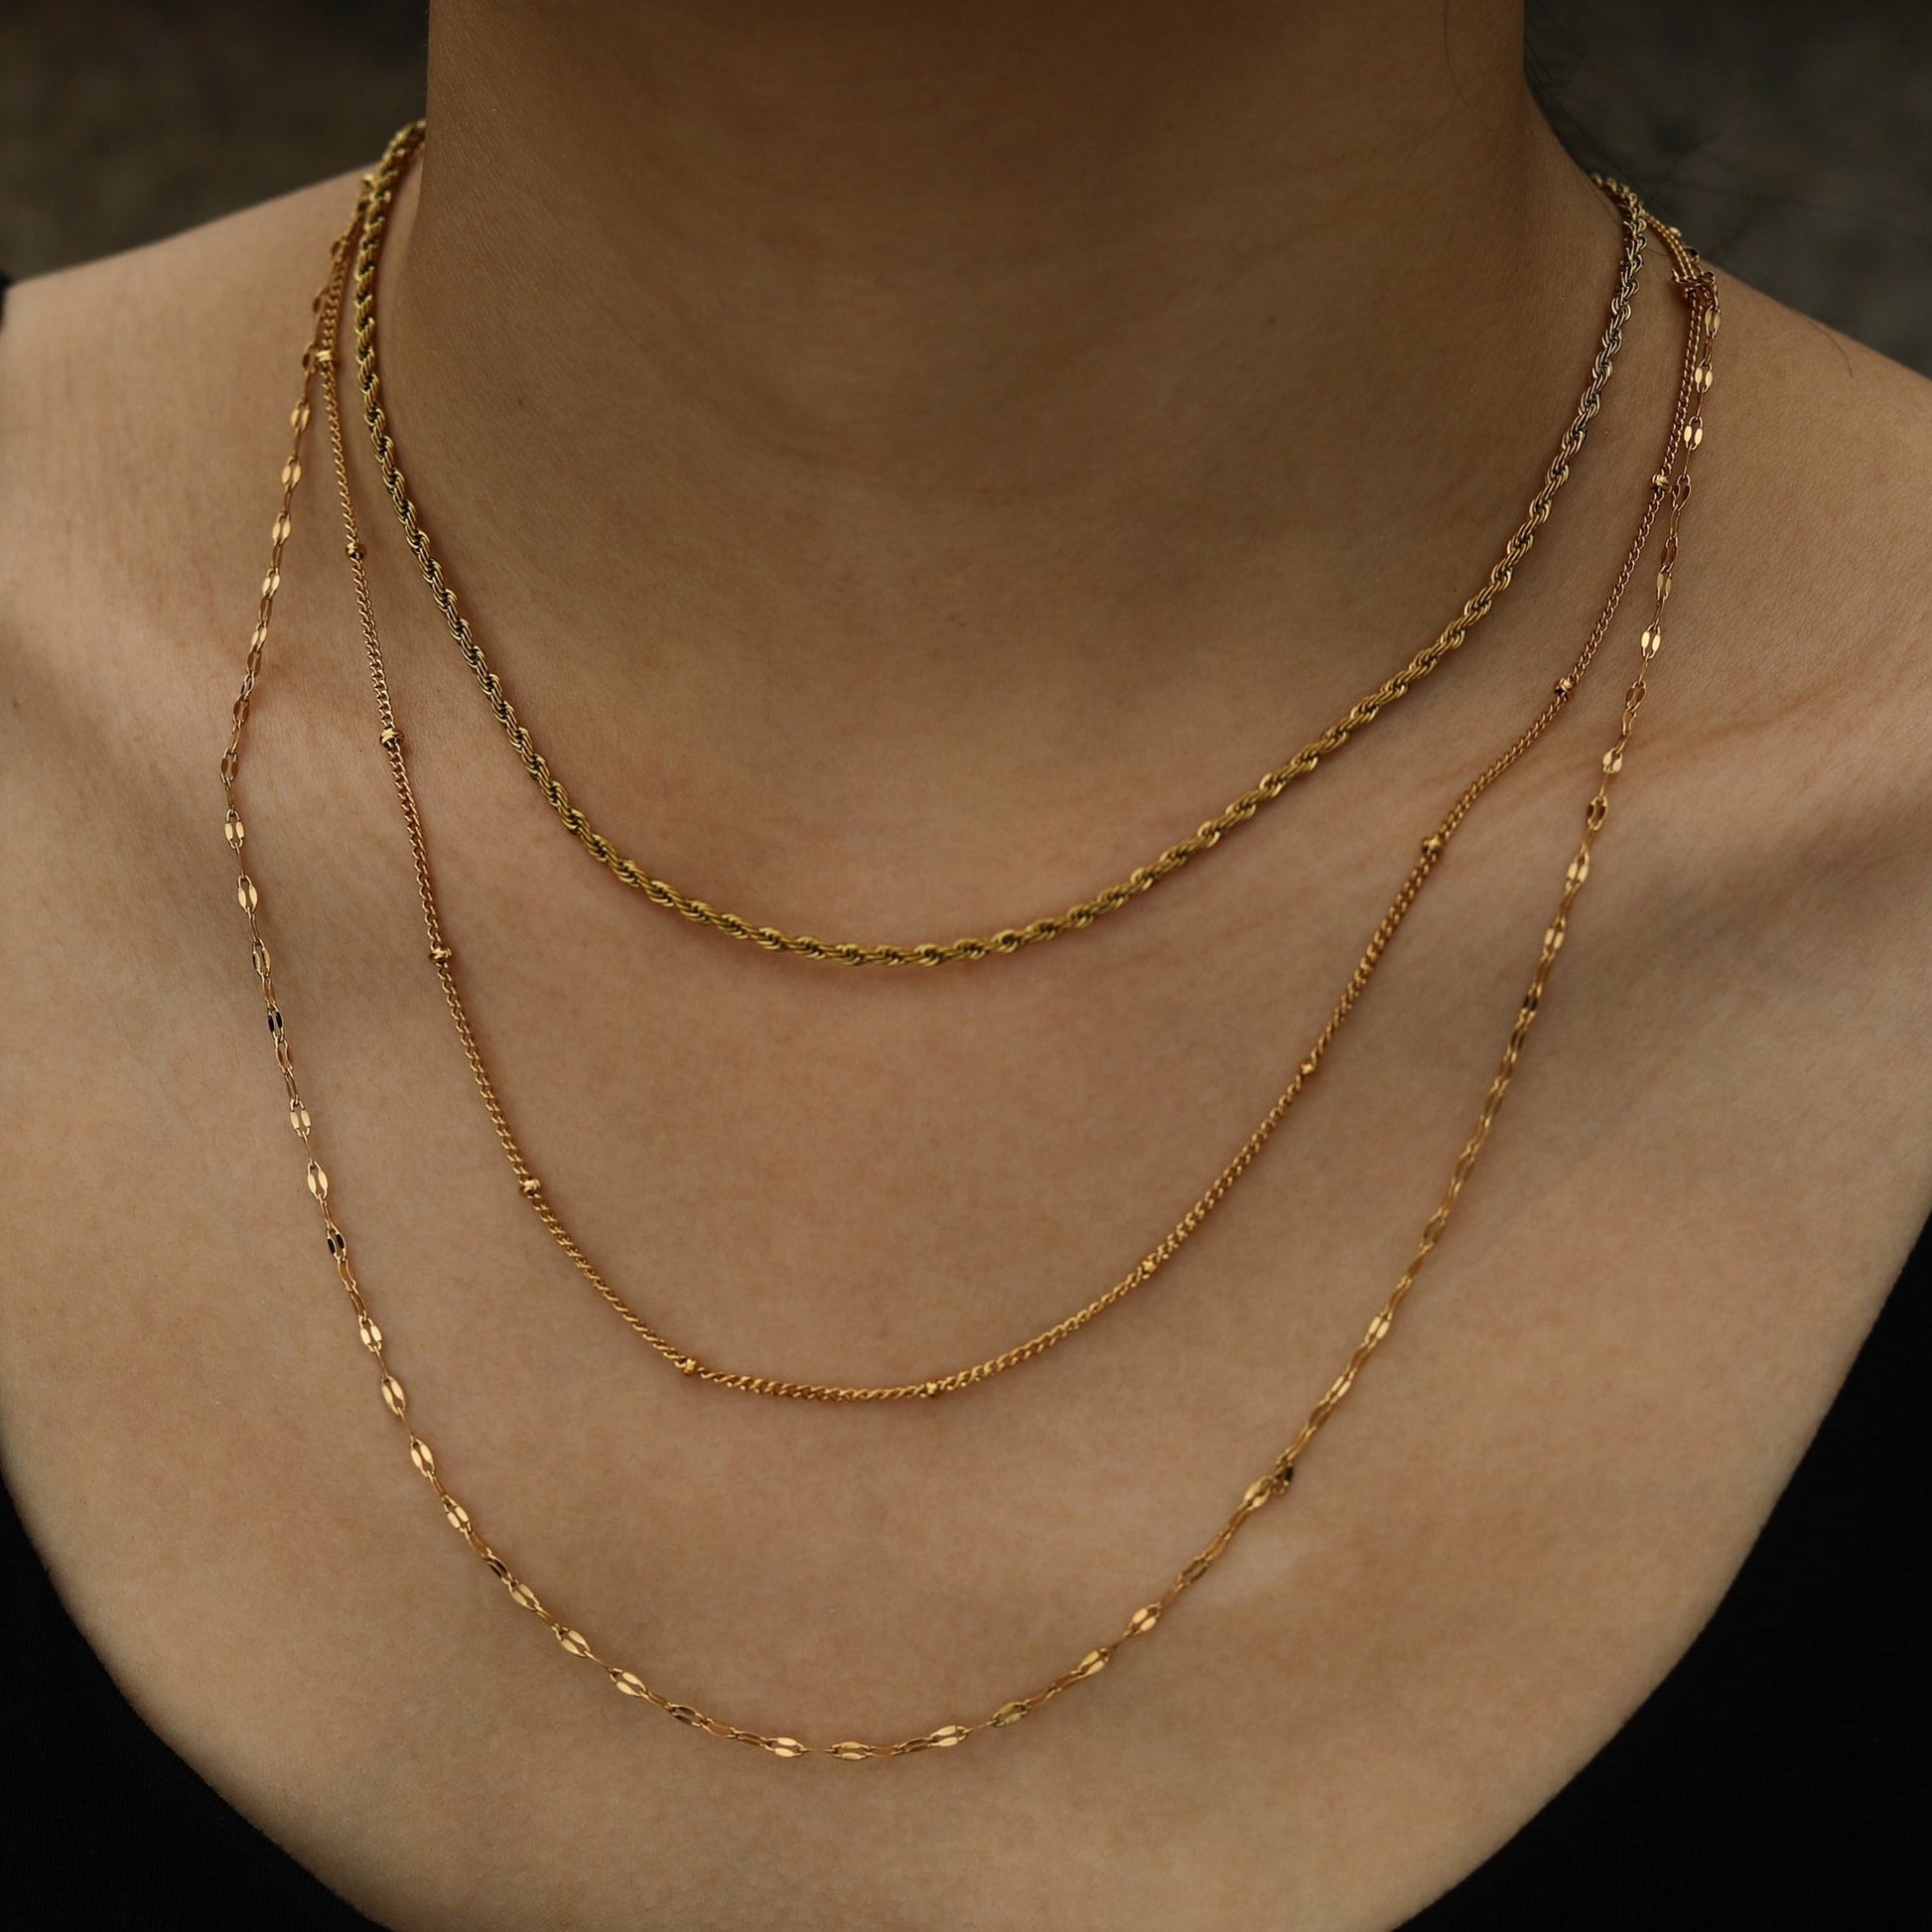 hackney-nine | hackneynine | necklace | layered-necklace | layered-chain-necklace |  jewellery | jewellery-store | shop-jewelry | gold-jewellery | silver-jewellery | dressy_jewellery | classy_ jewellery | on_trend_jewellery | fashion_ jewellery | cool_jewellery | affordable_jewellery | designer_jewellery | vintage_jeweler | gifts-for-her | gifts-for-mum | gifts-for-girls | gifts-for-females 